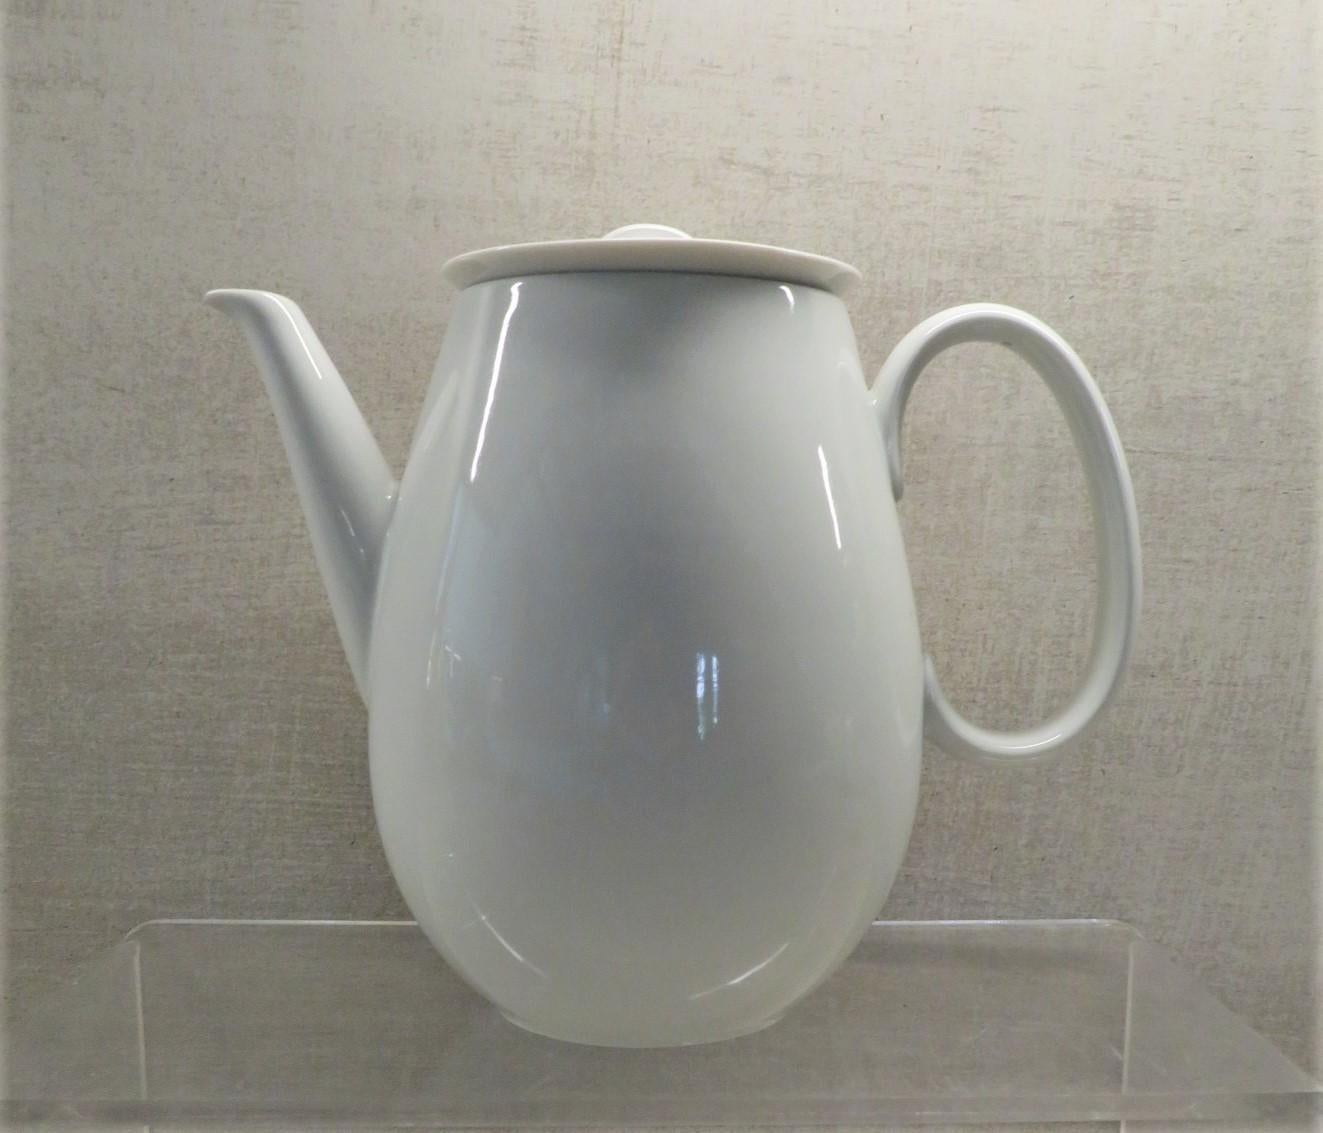 From the iconic Coupe Form dinnerware, created by Raymond Loewy for Continental China in the 1950s, a White Rhythm coffee pot in excellent condition. With its beautiful bulbous shape and smooth feel of porcelain, this elegant coffee pot in white